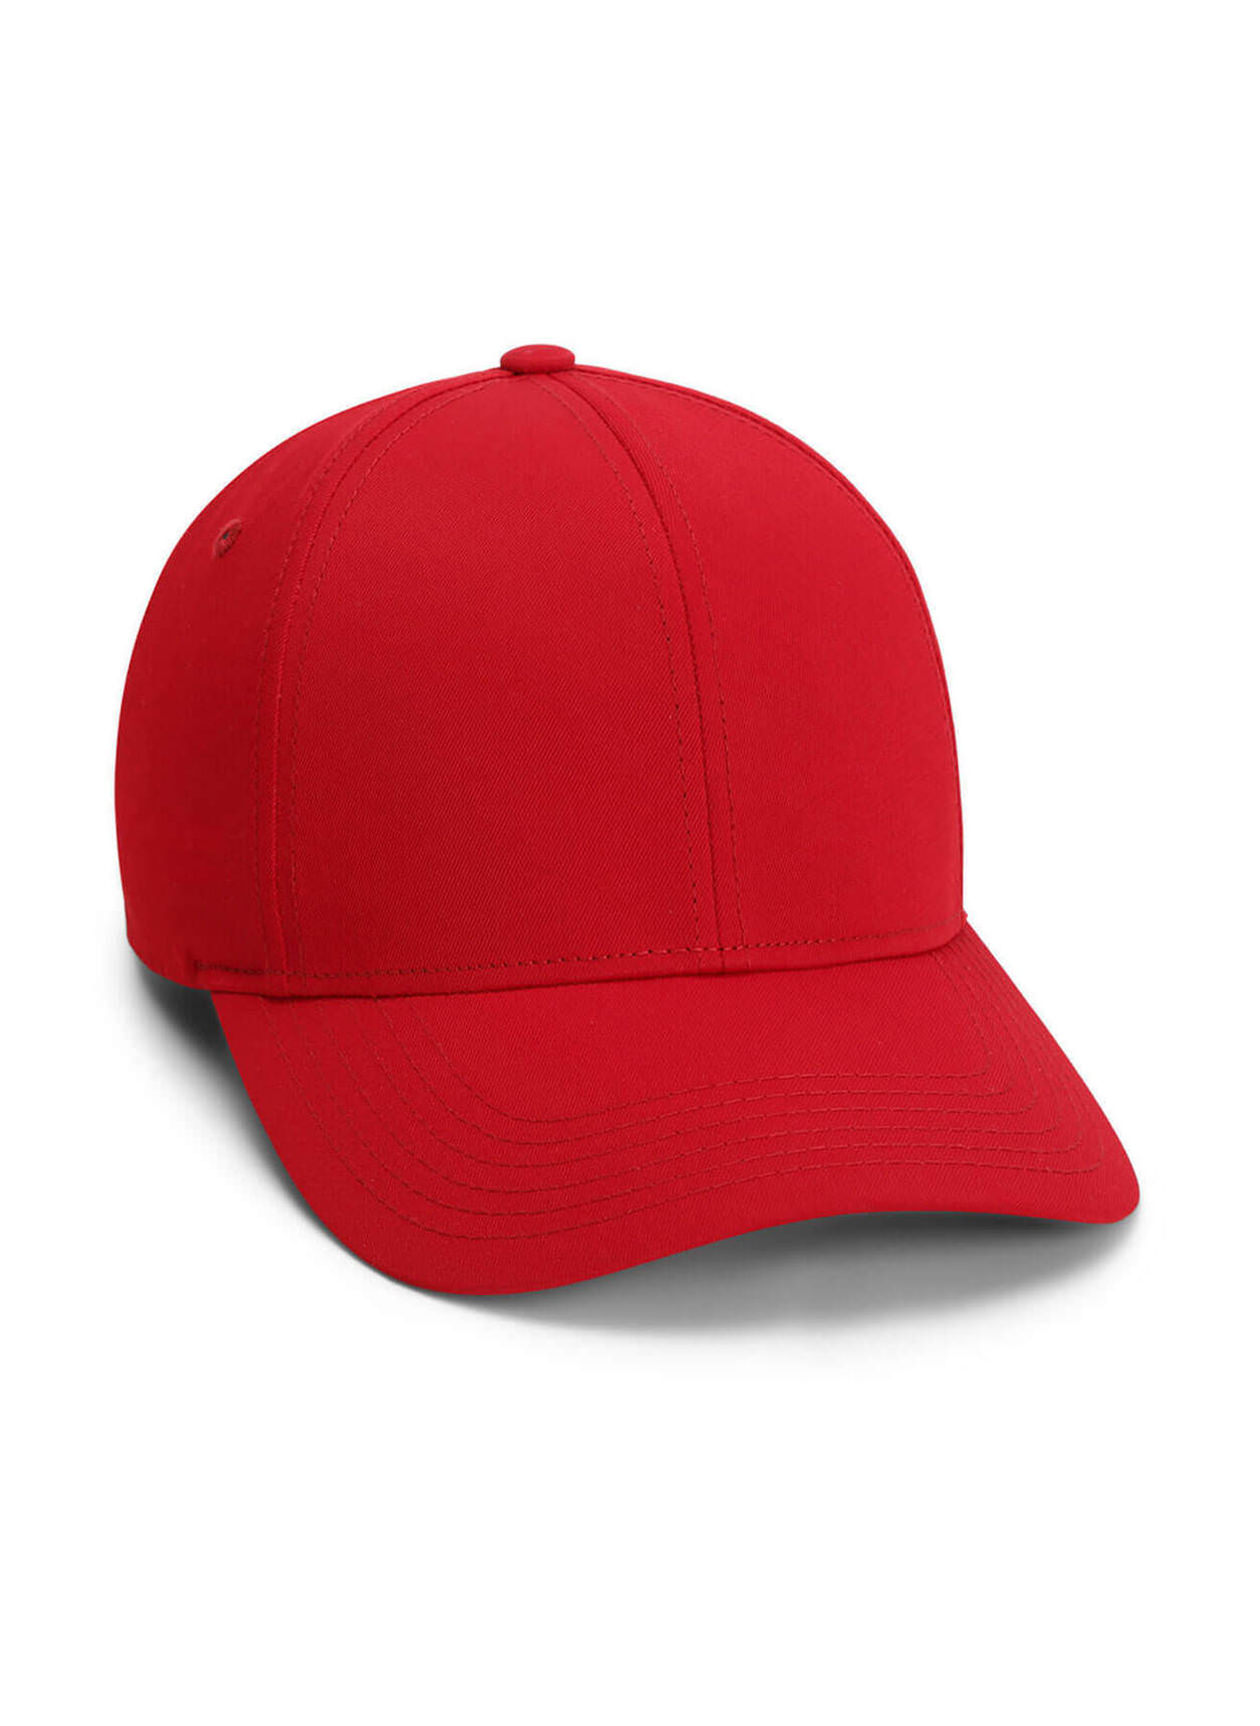 Imperial Red The Whitaker Soft Washed Poly Hat